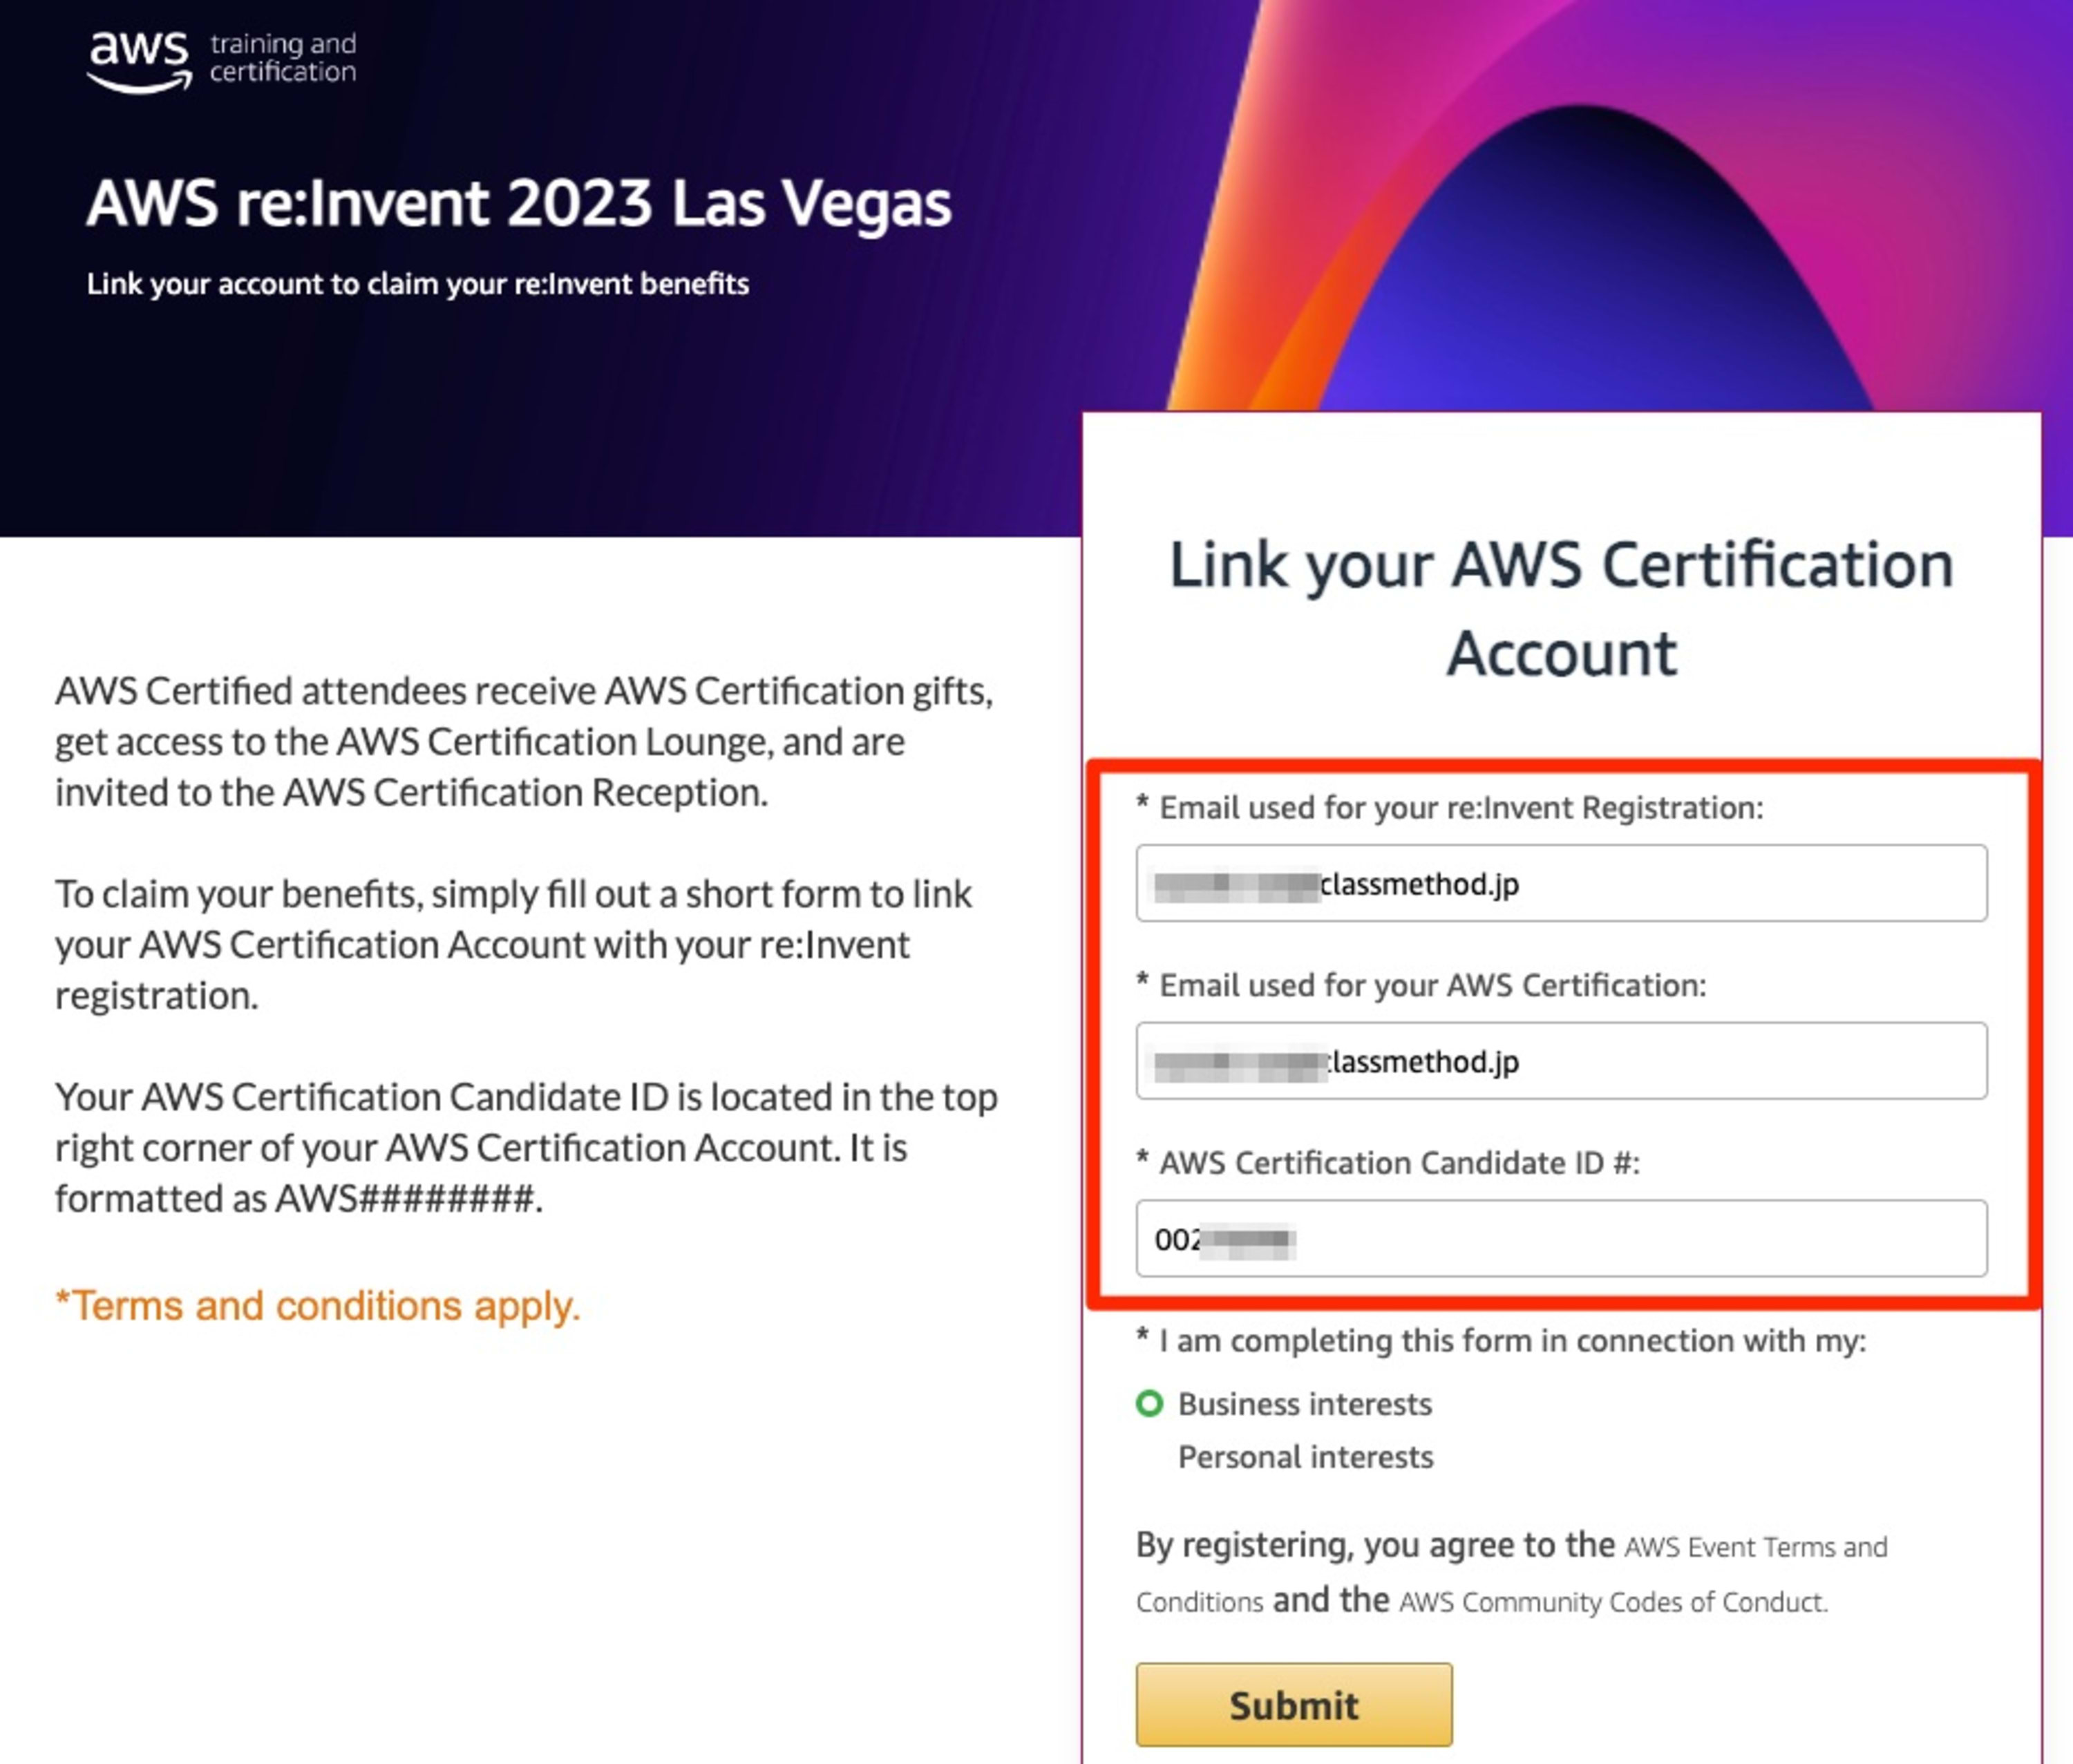 Link_AWS_Certification_Account